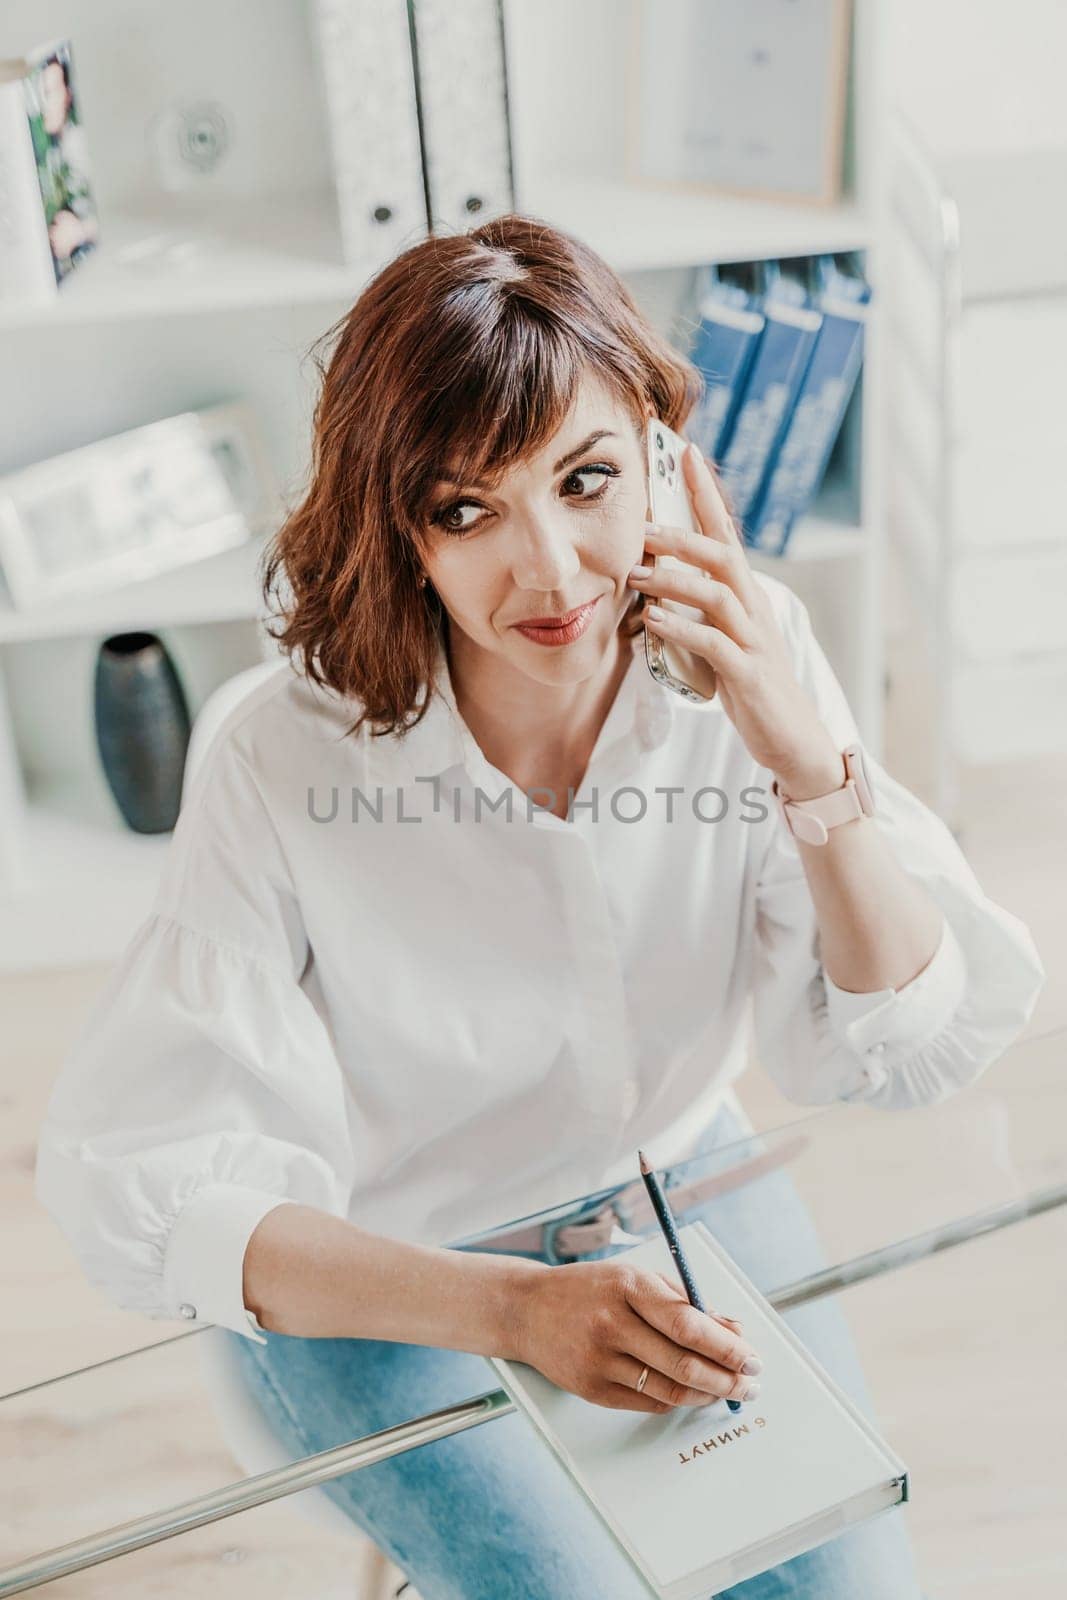 Woman in the office at the computer. She is dressed in a white shirt and blue jeans sitting at a table on which is a laptop and a notepad. Works in the office, bright workplace